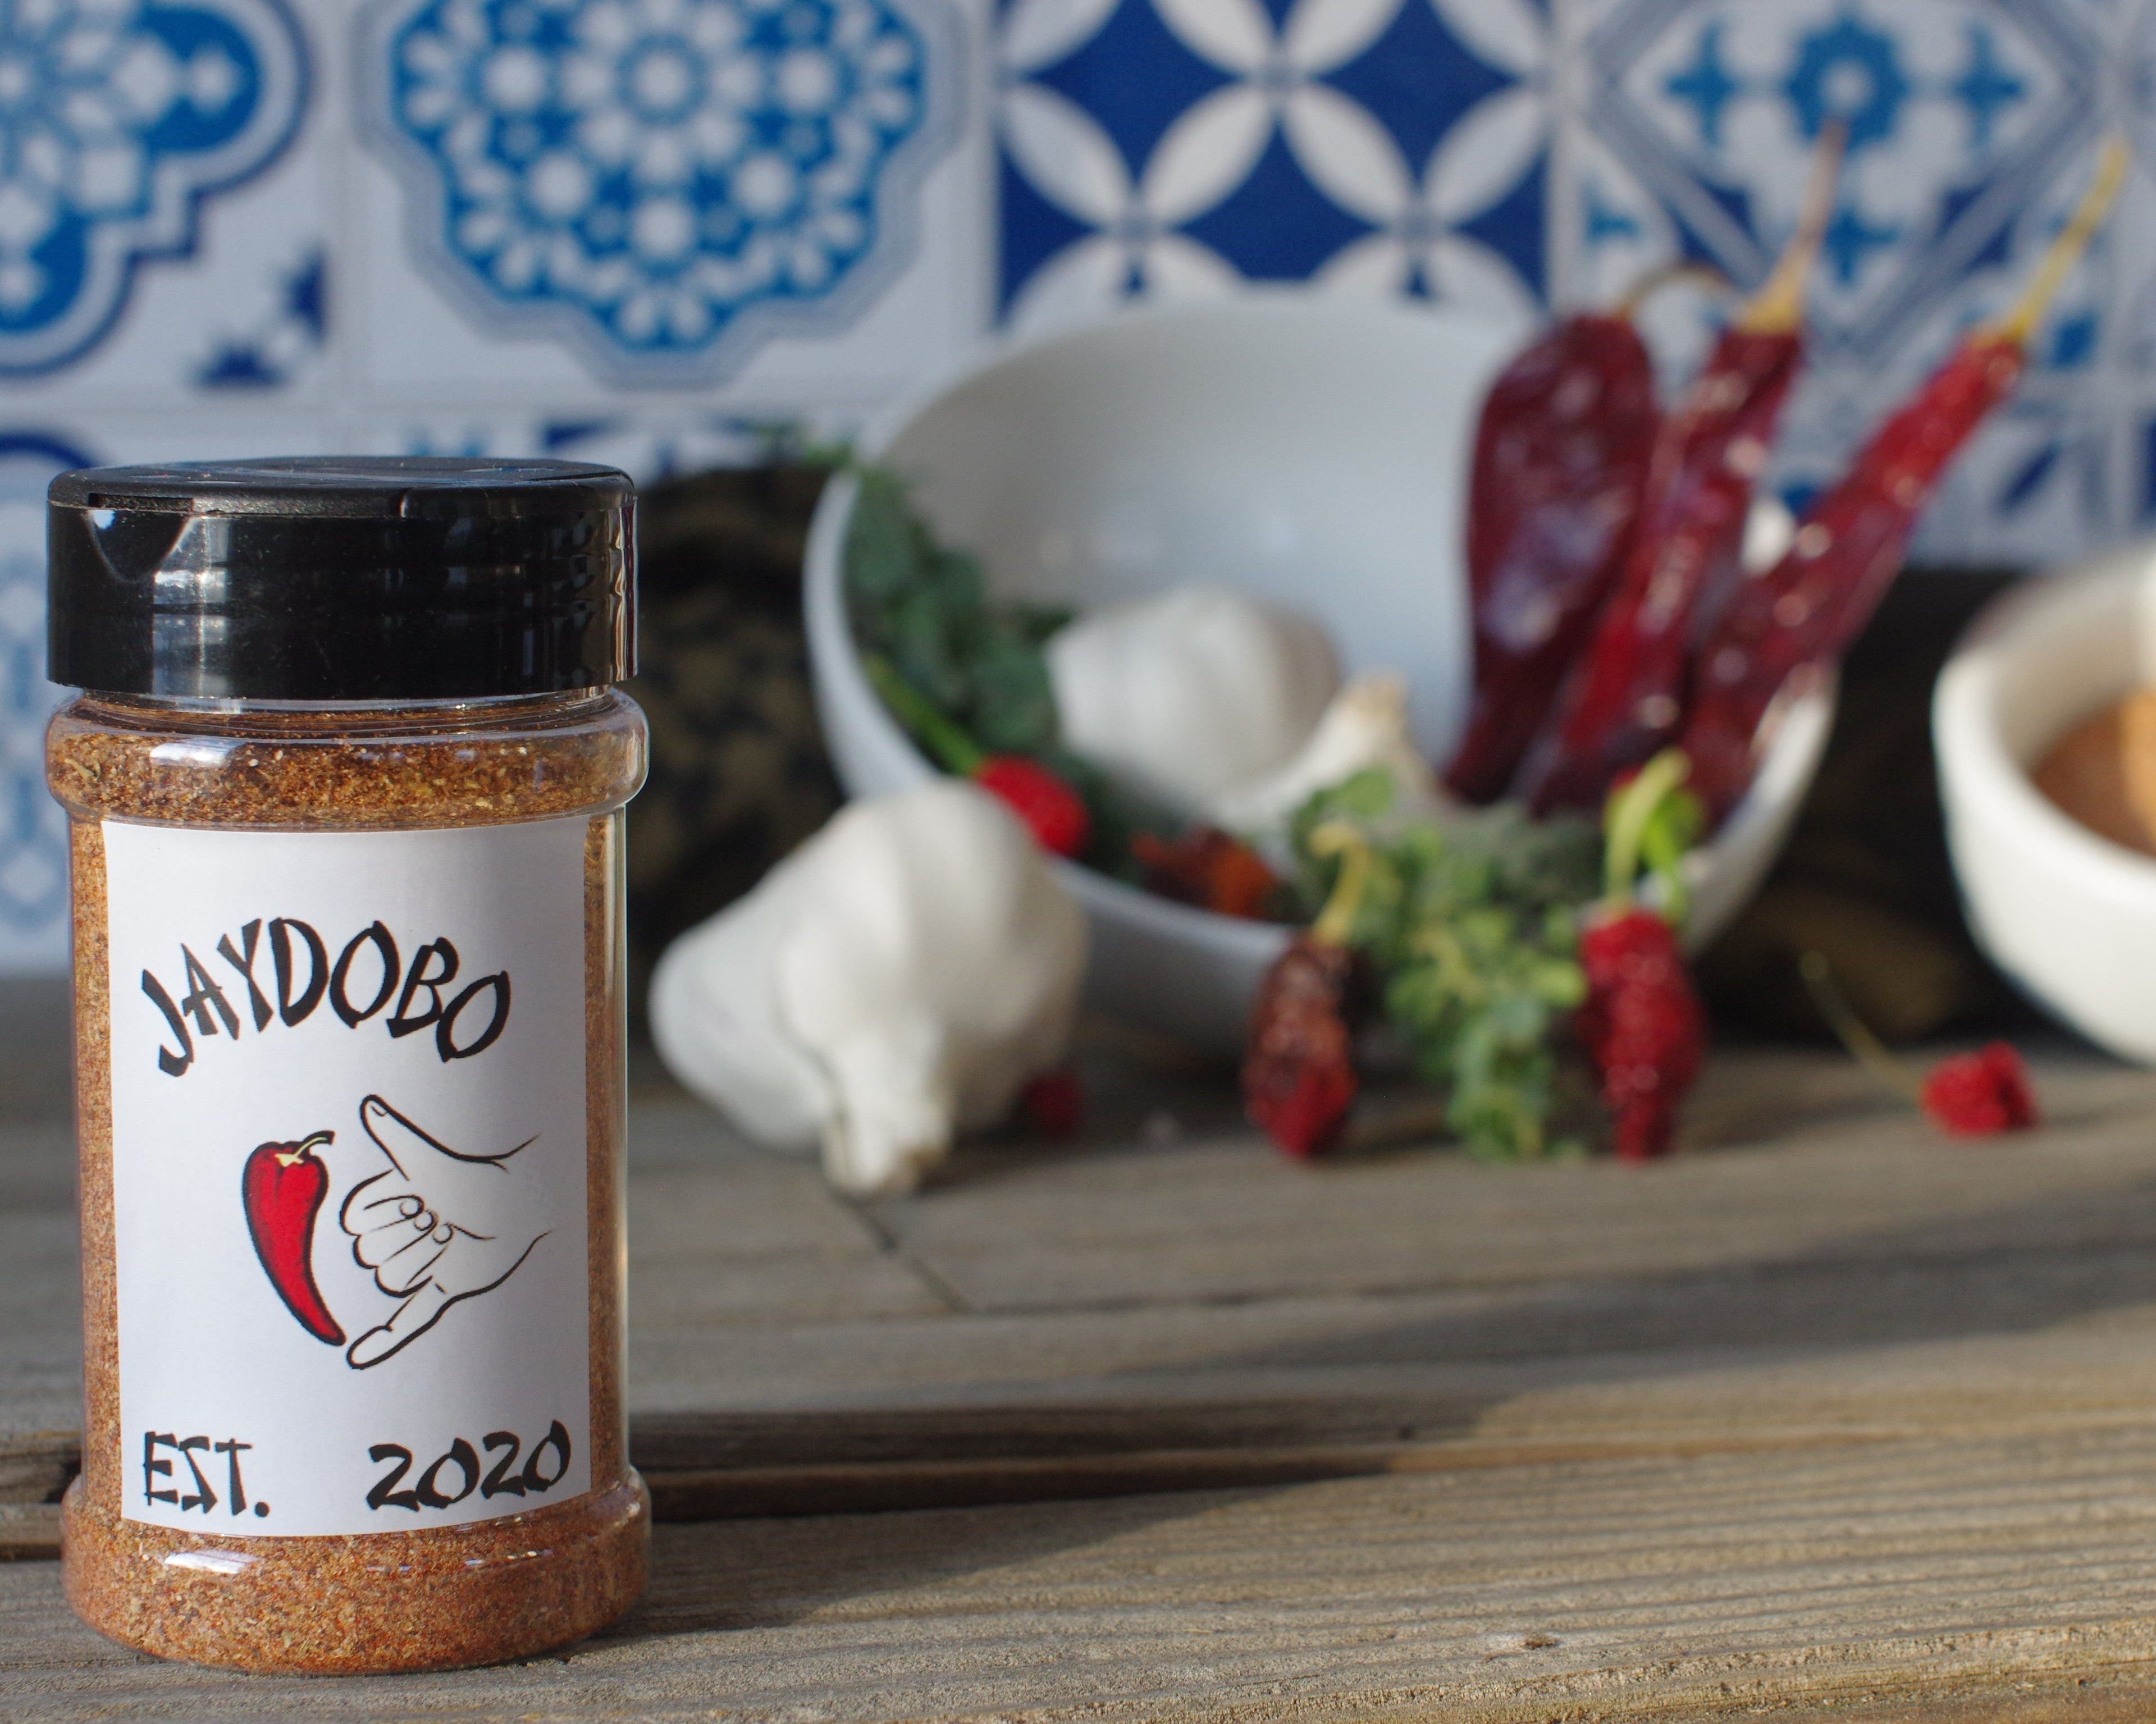 Jaydobo's classic spice blend positioned in front of ingredients. Featured ingredients are dried Carolina Reaper peppers and garlic bulbs.